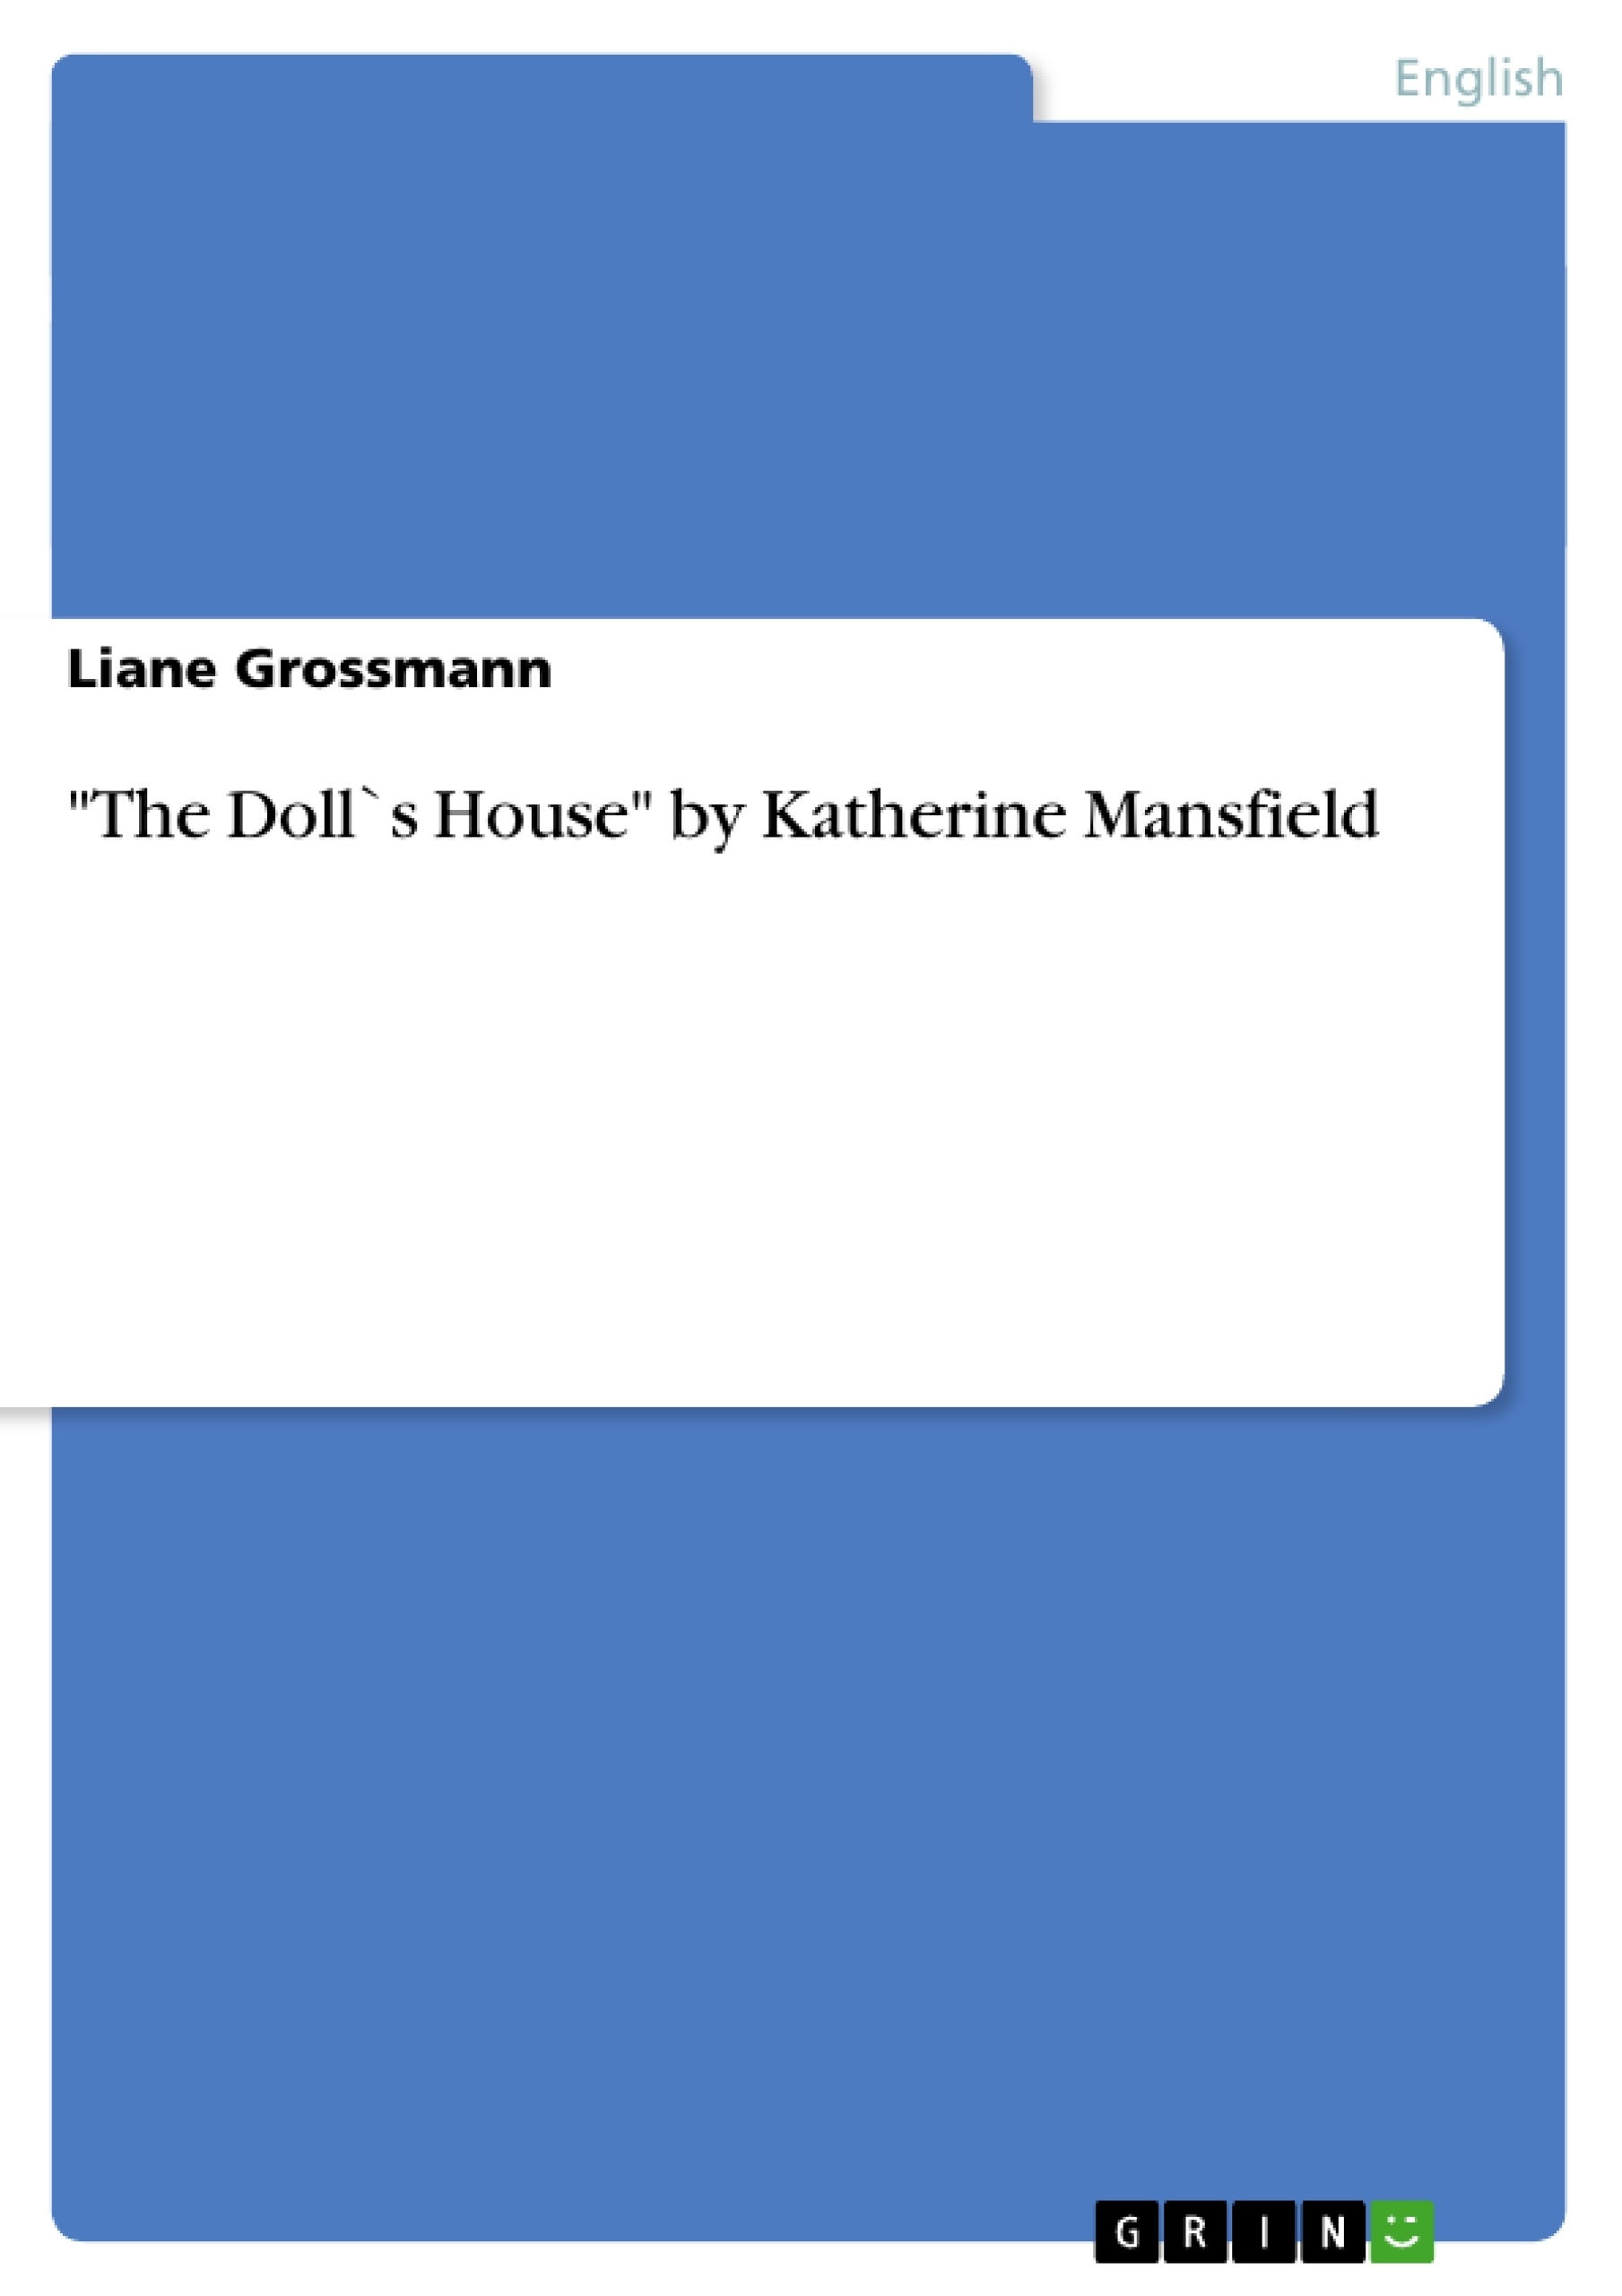 Título: "The Doll`s House" by Katherine Mansfield